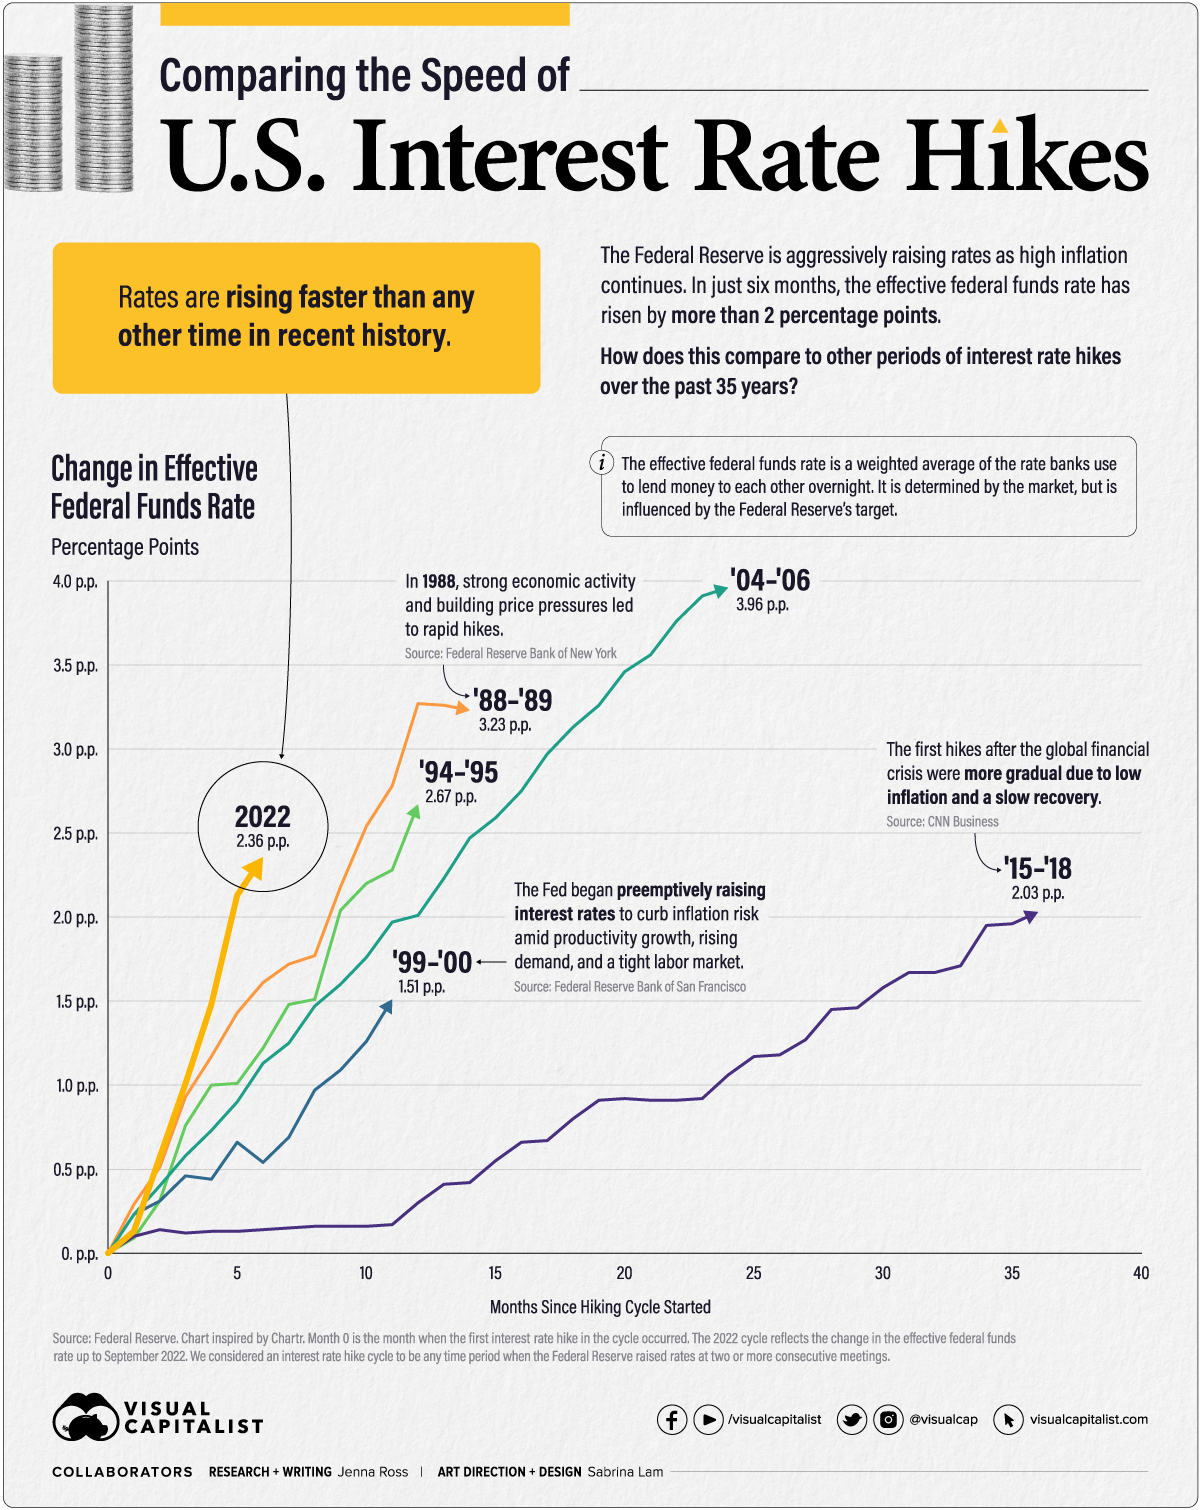 Comparing The Speed Of U.S. Interest Rate Hikes (1988-2022): https://www.valuewalk.com/wp-content/uploads/2022/10/Interest-Rate-Hikes-Infographic.webp